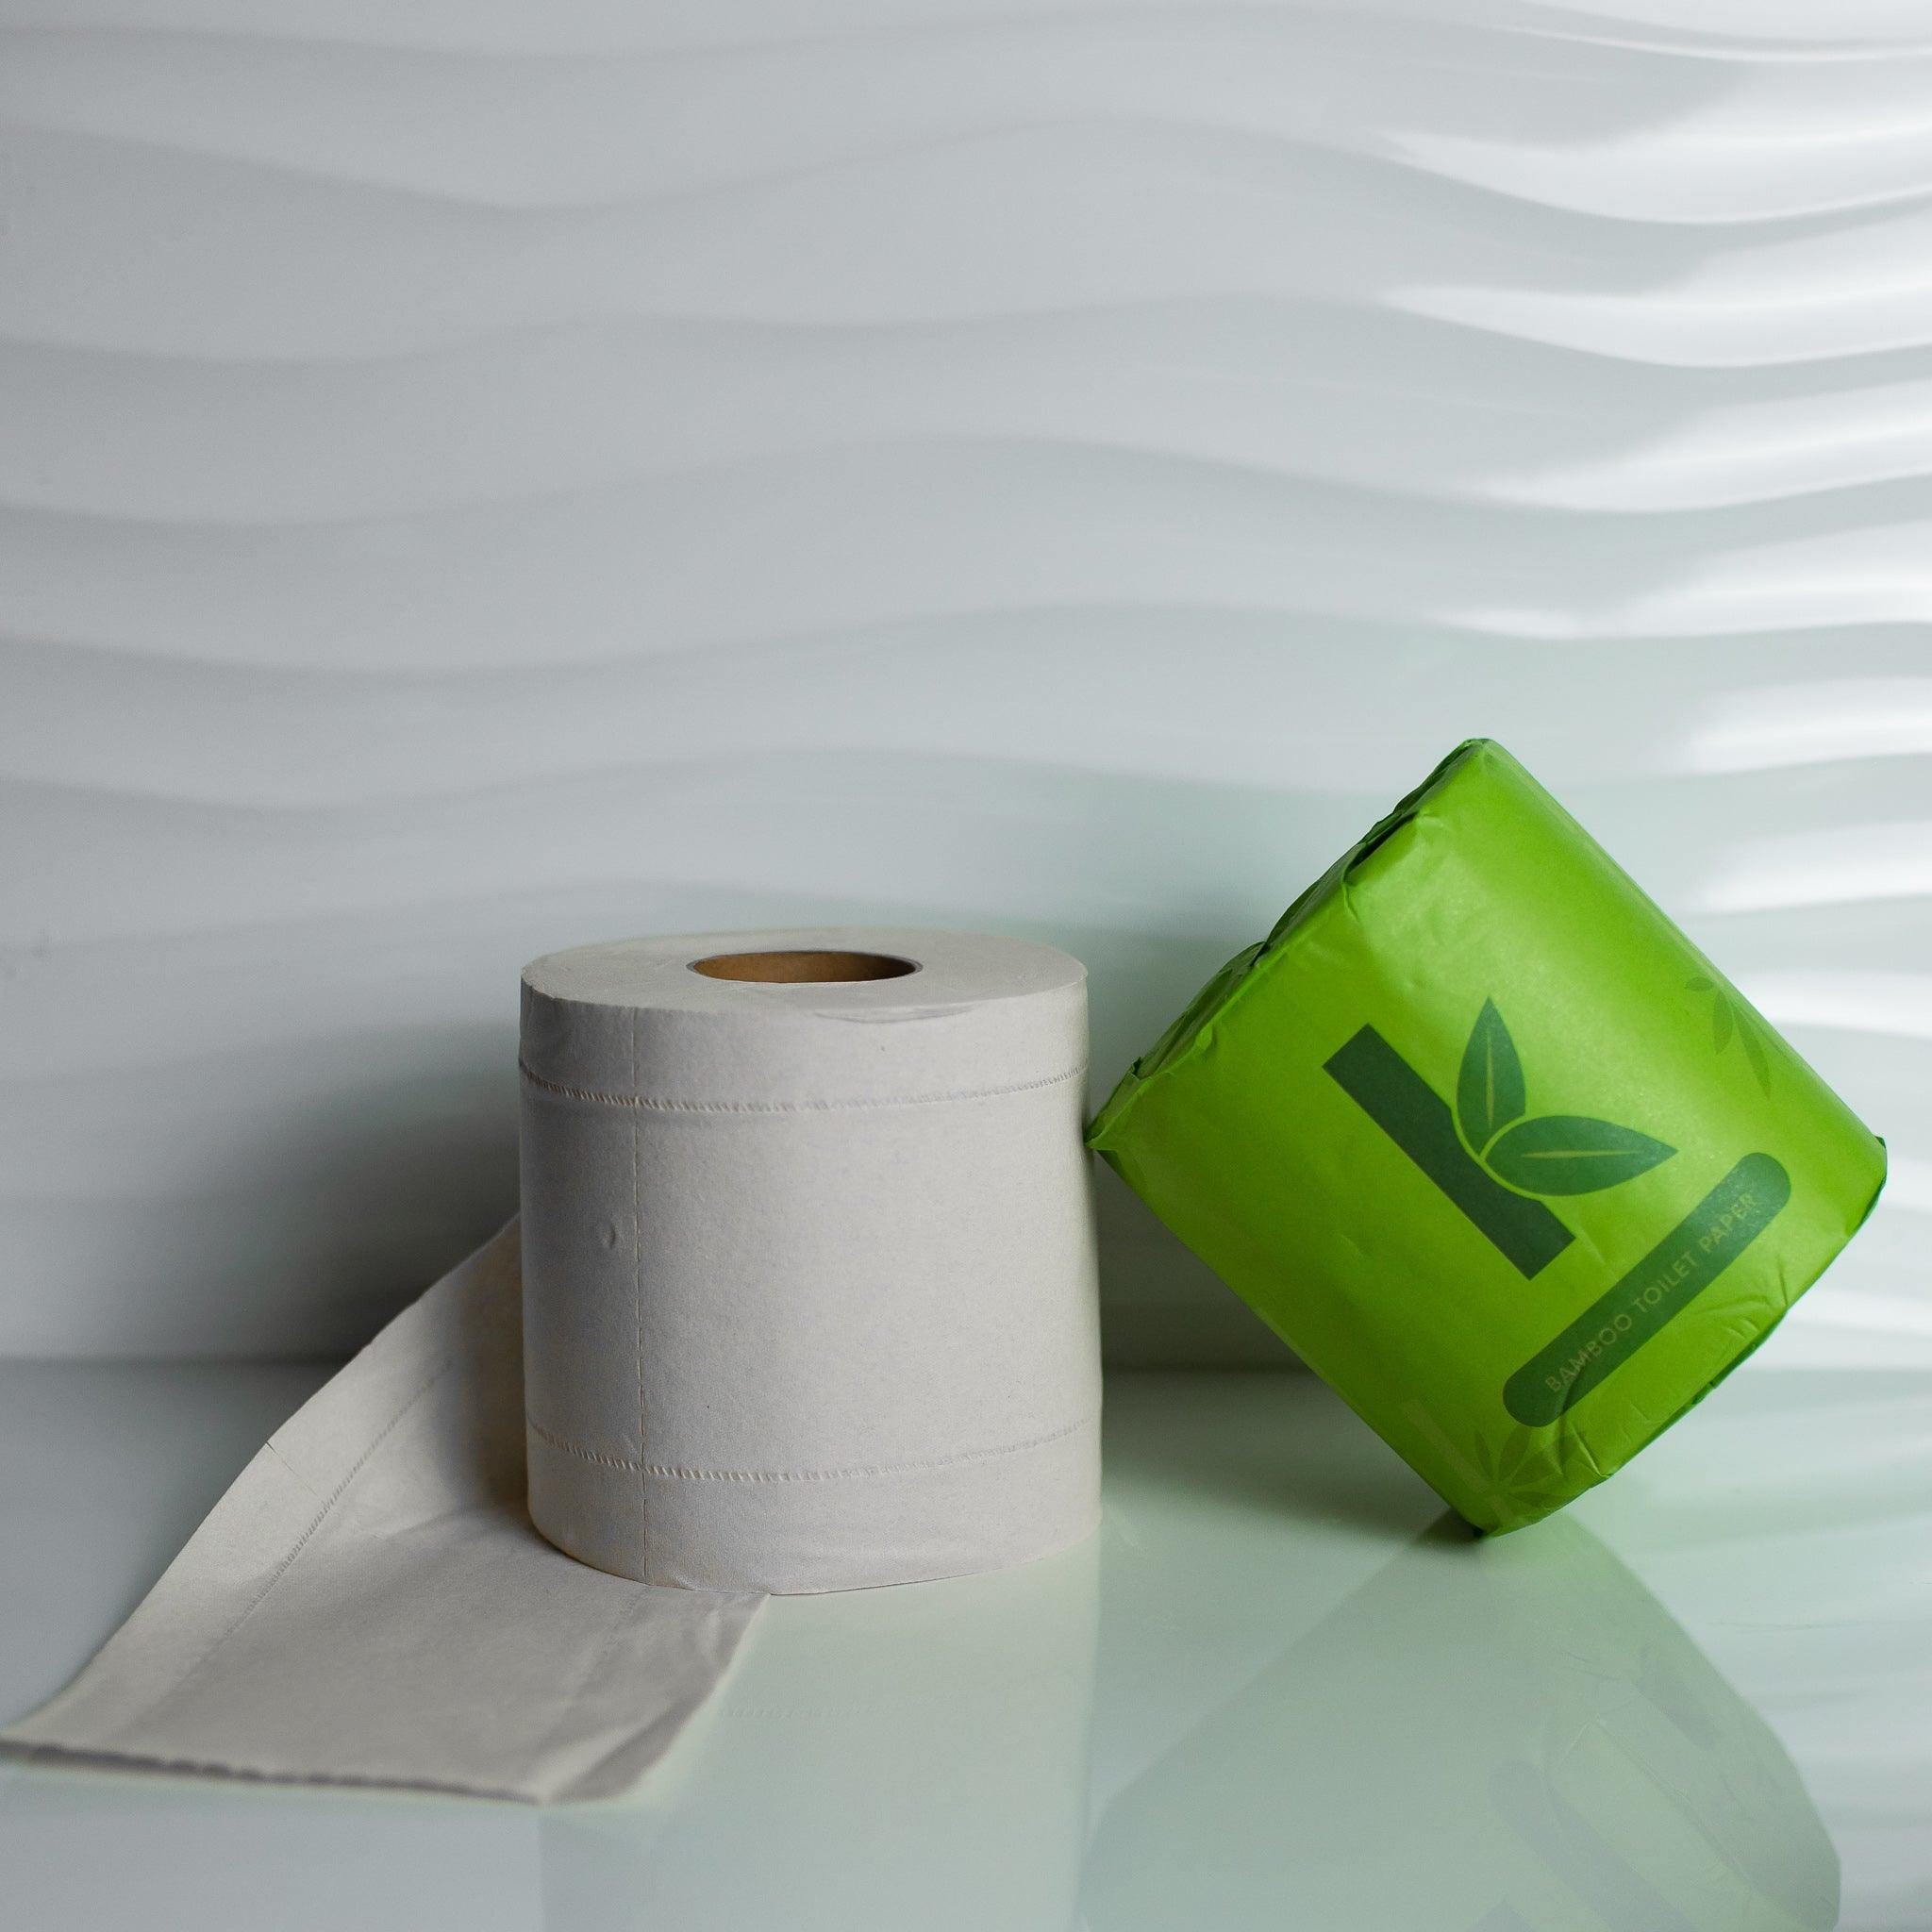 Bamboo Toilet Paper Subscription